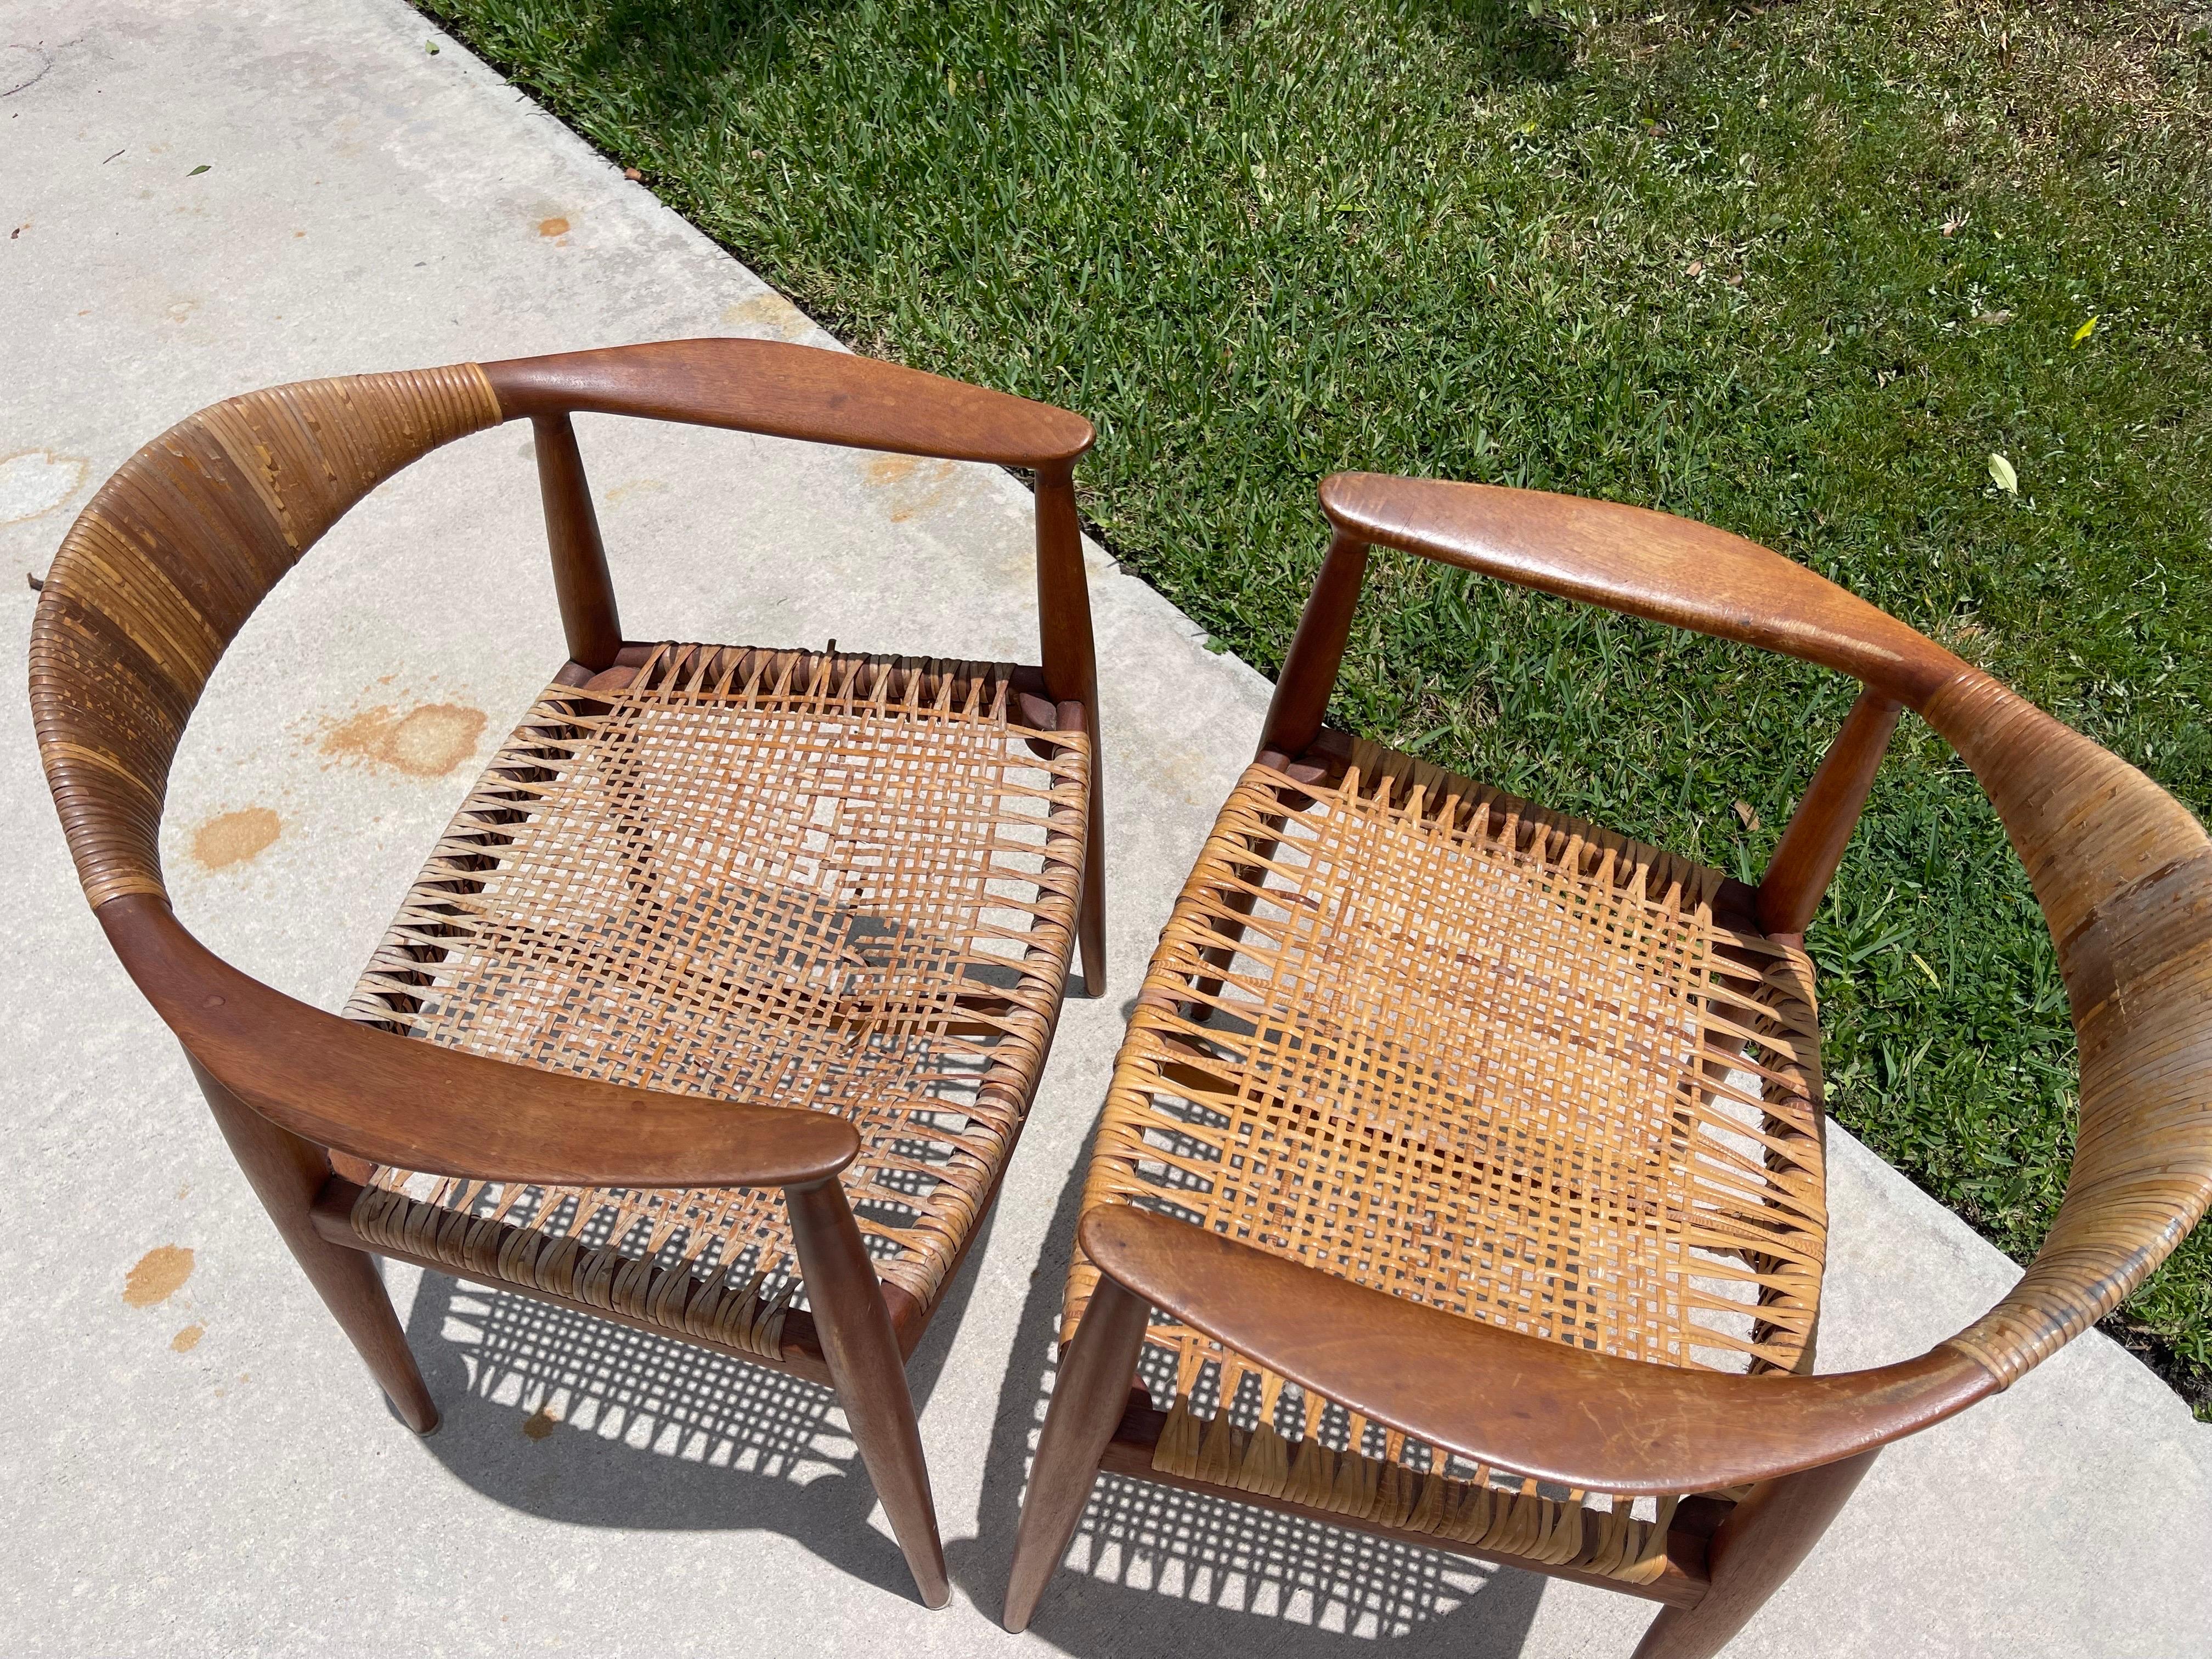 Hans Wegner “The Chair” Early Example Teak, Cane Armchairs, a Pair For Sale 4